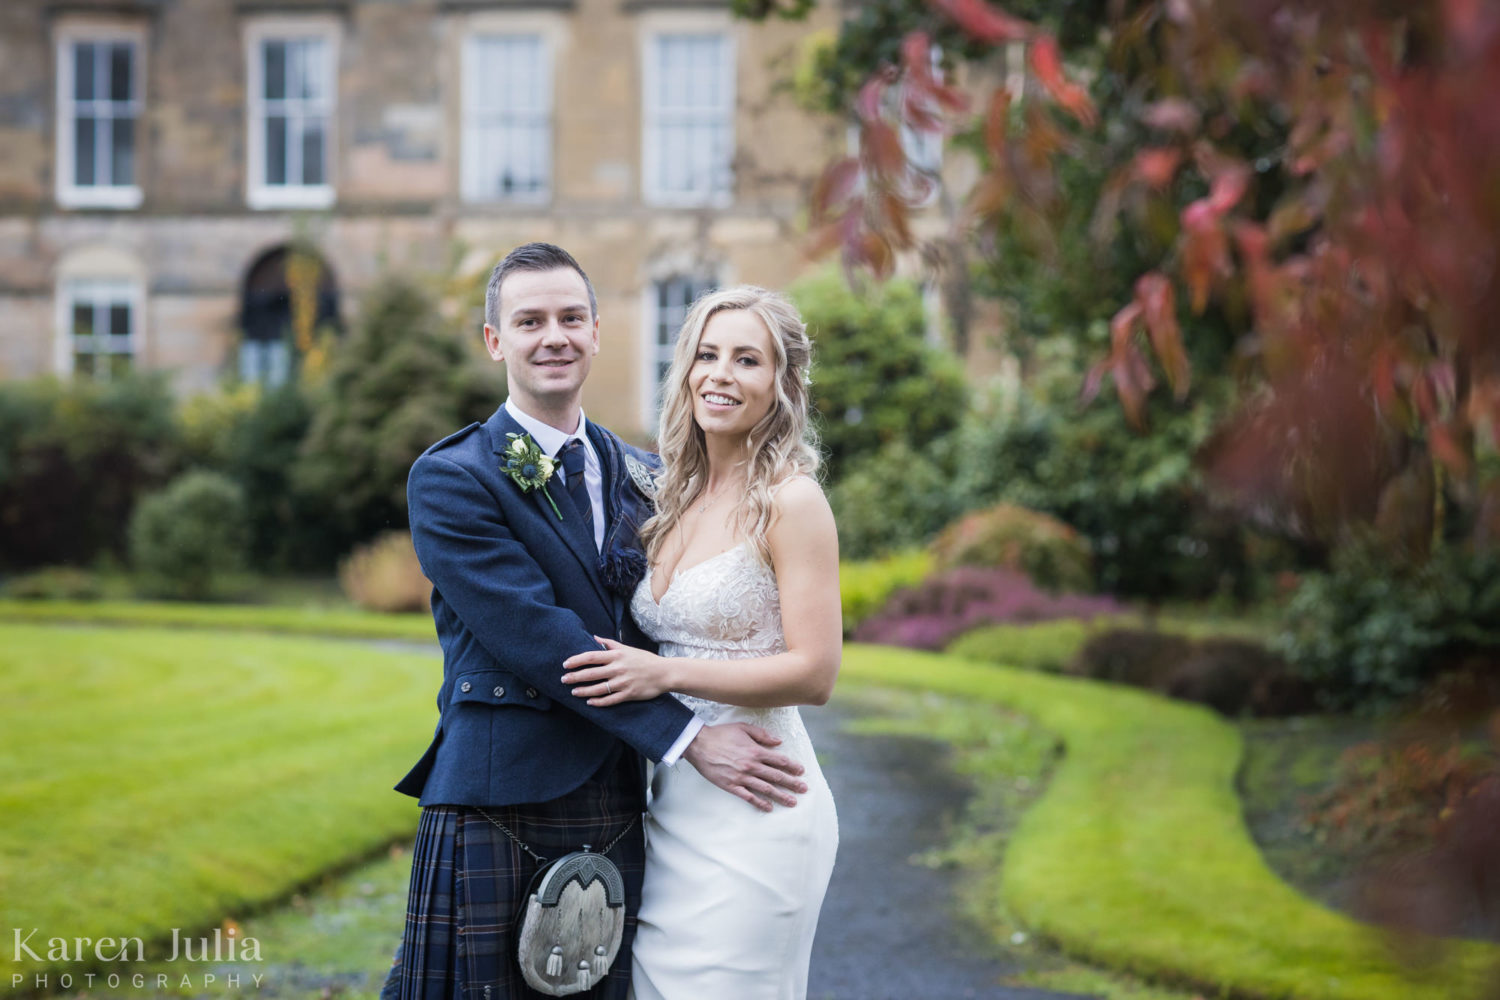 bride and groom wedding day portrait in Blythswood Square gardens